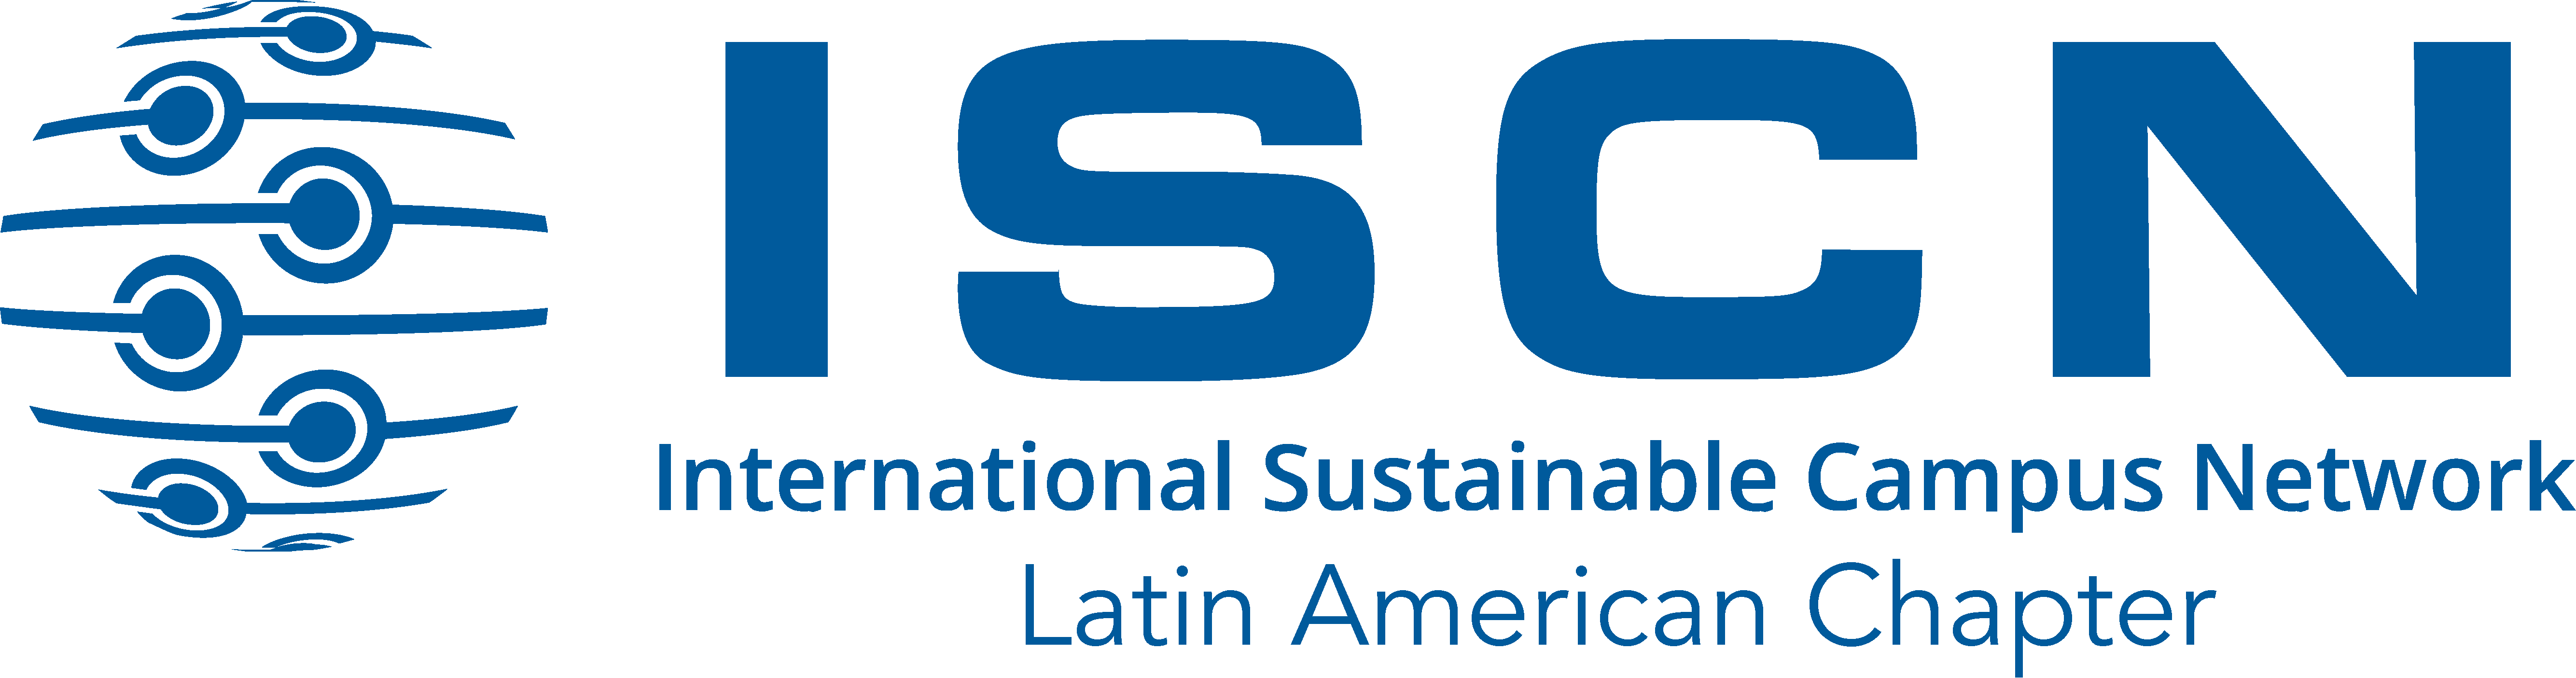 ISCN Latin American Chapter